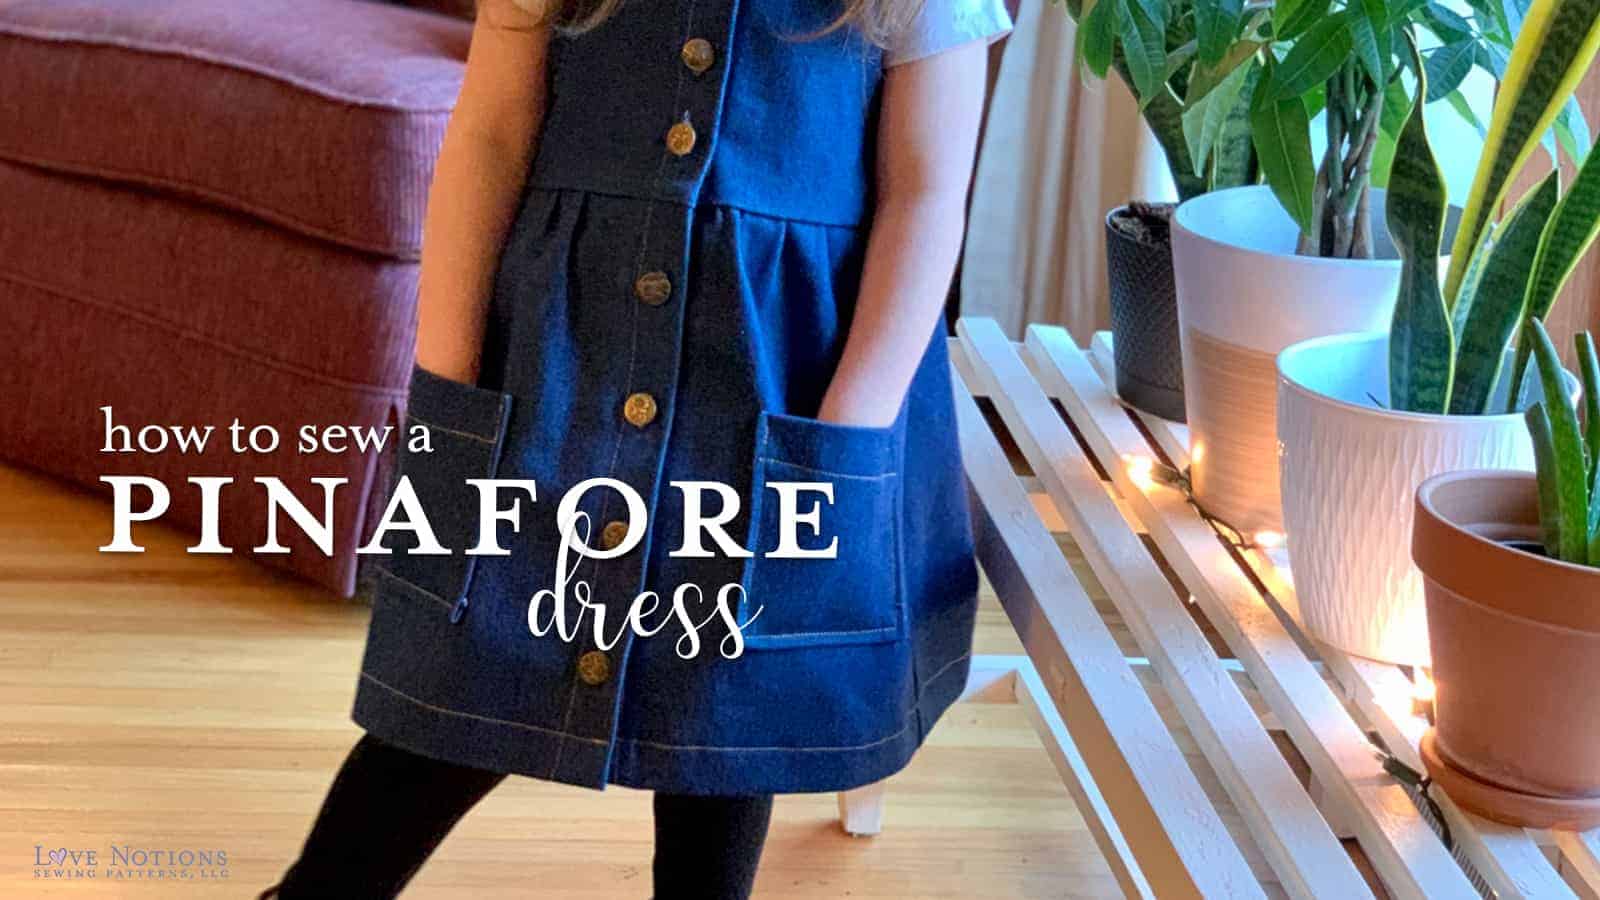 dolce dress pinafore